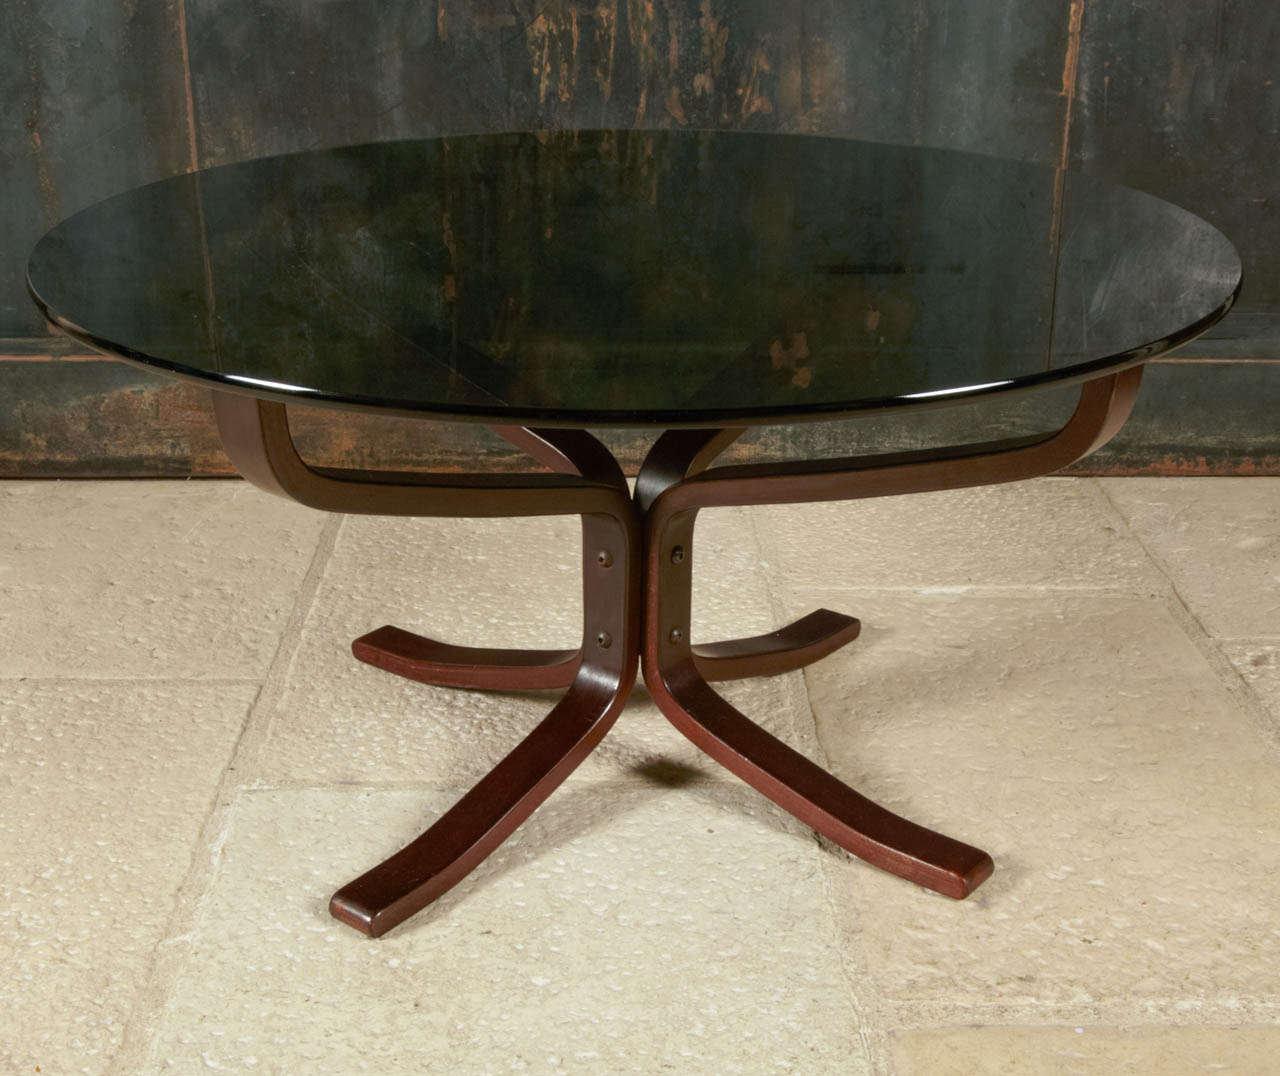 Circa 1970 round coffre table by Sigurd Ressel. Wood legs and 0.47